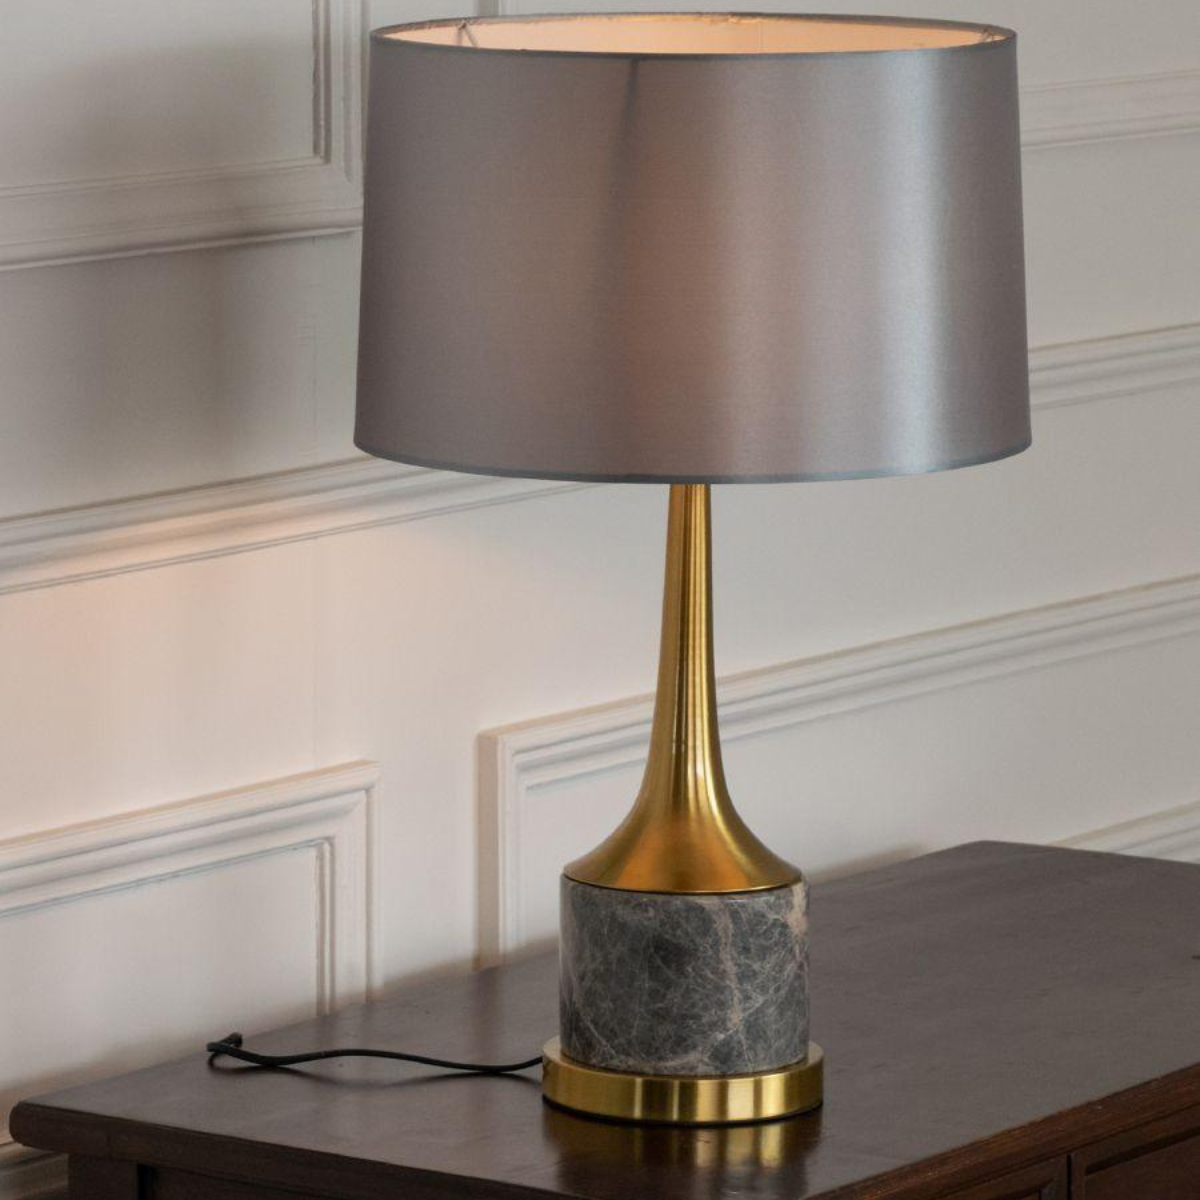 Dominion-Metal-Based-Modern-Bedside-Table-Lamp-6